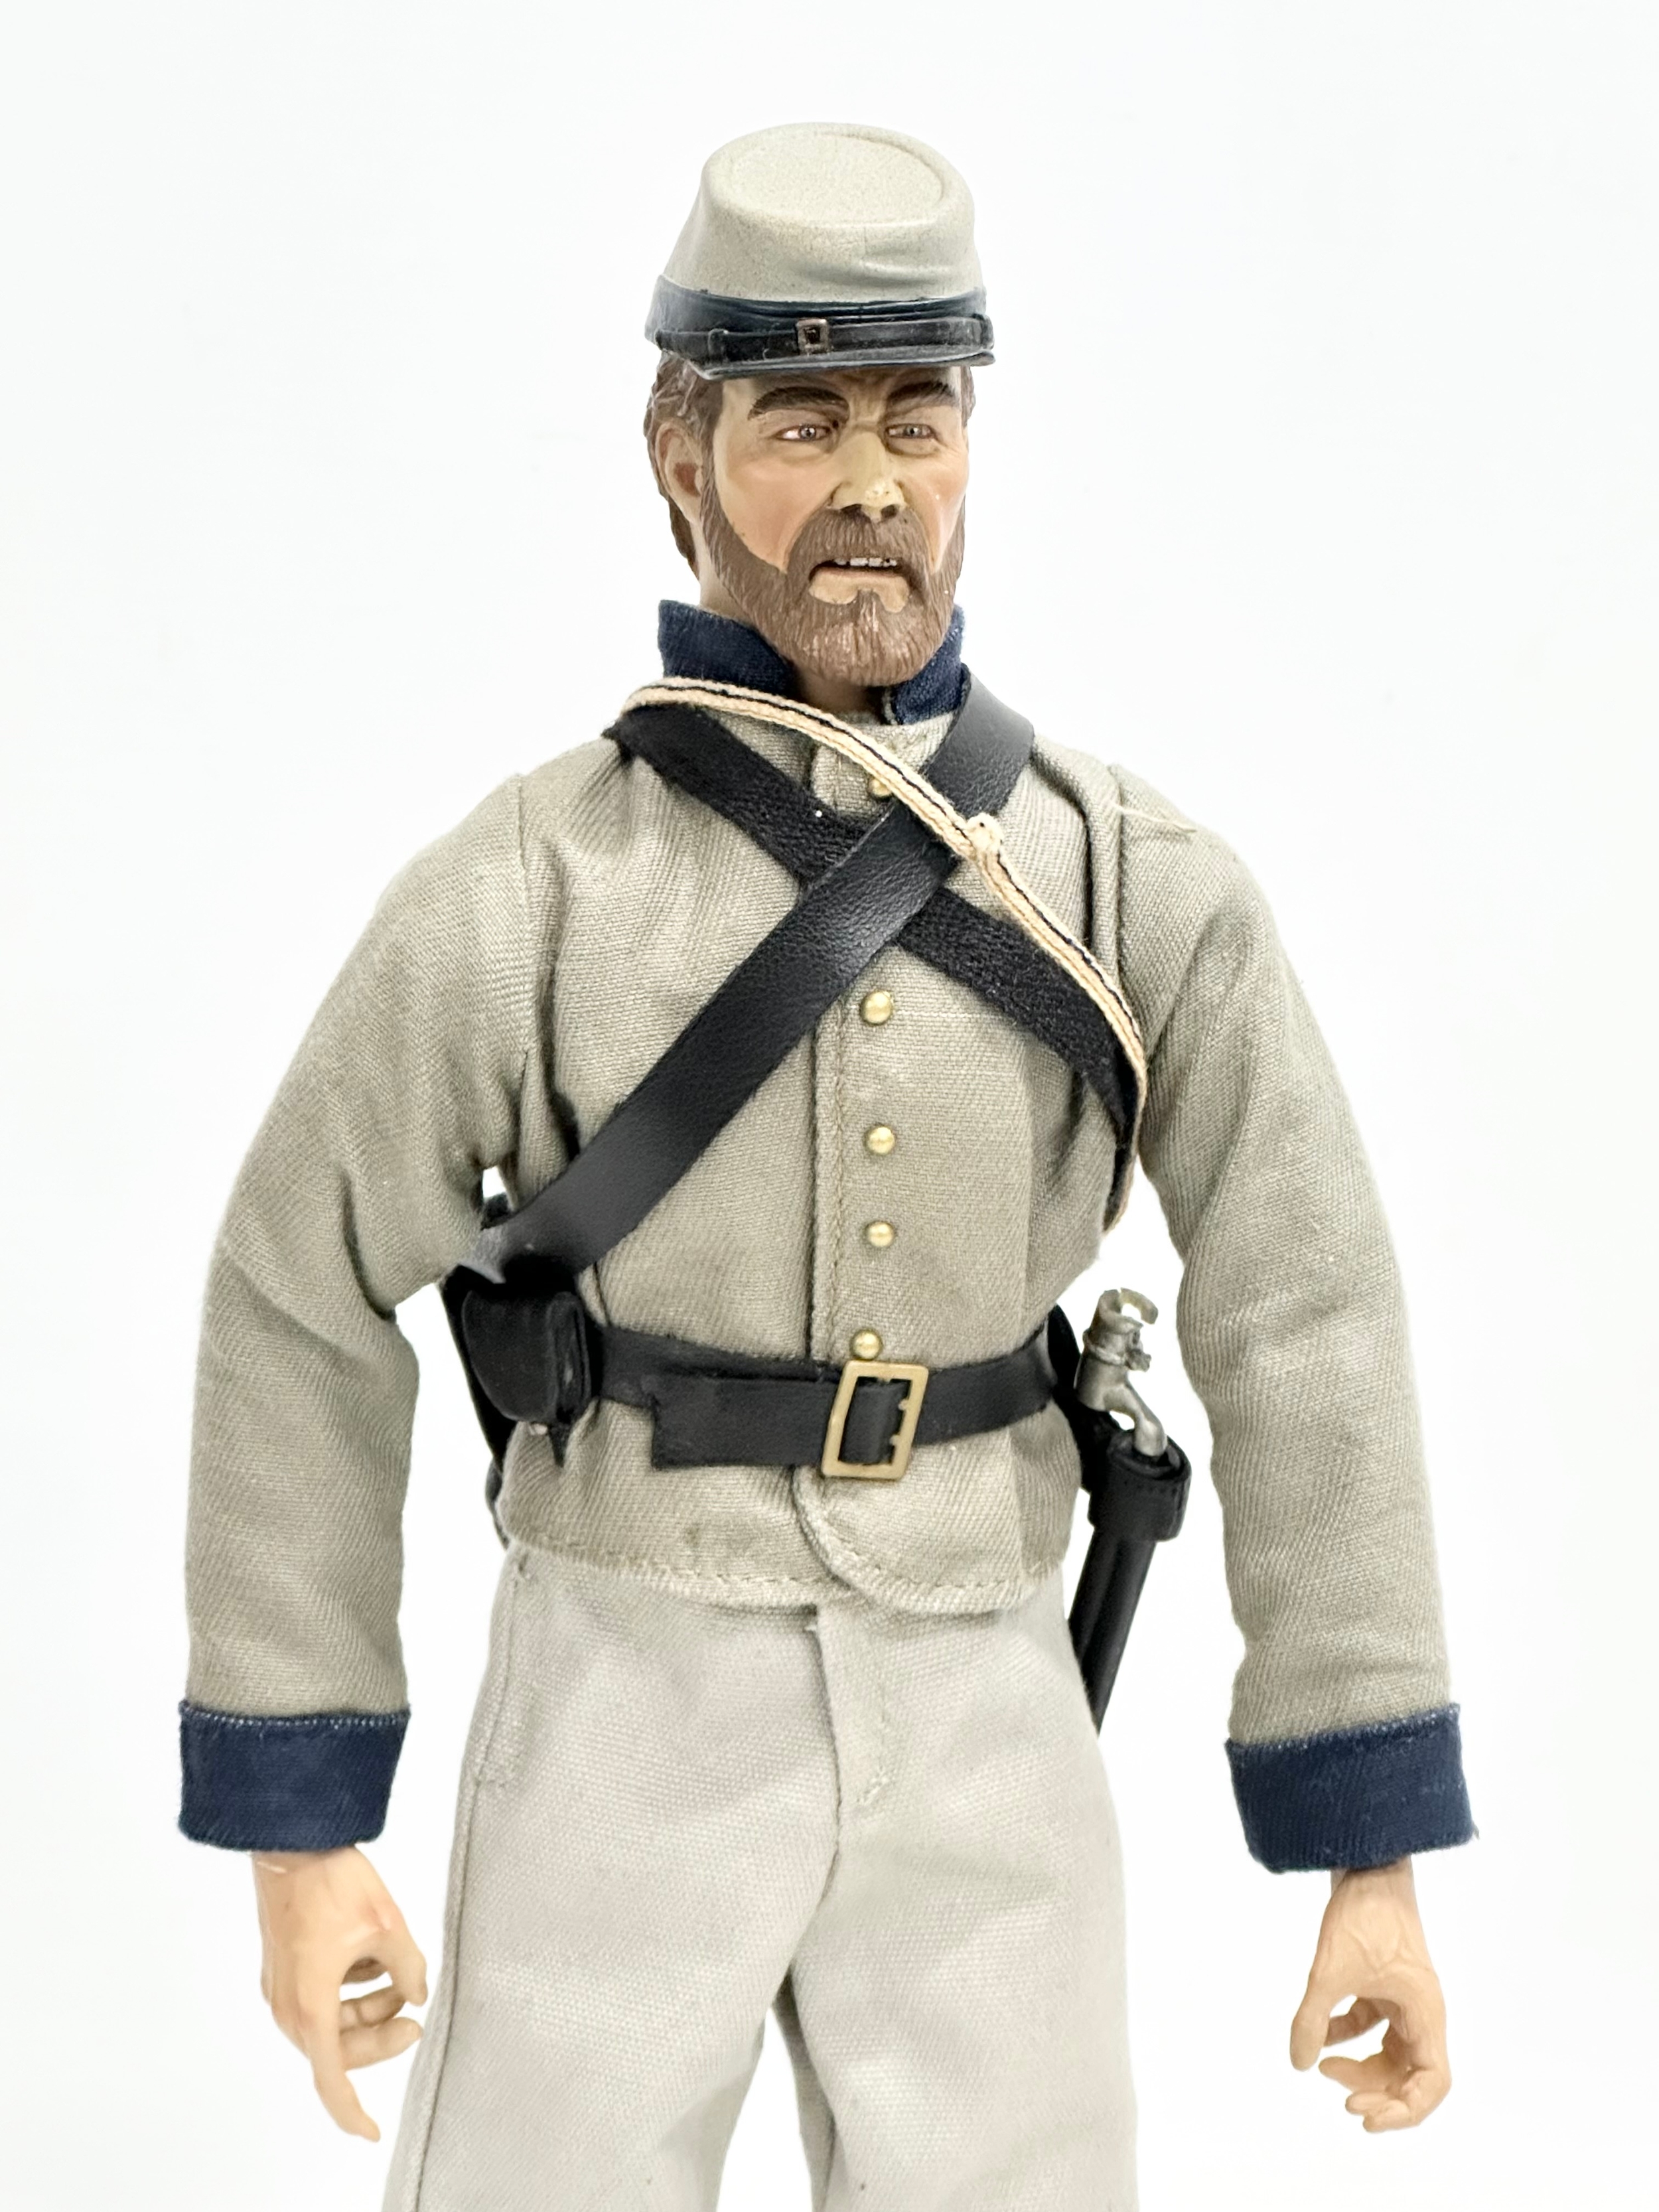 A Sideshow Toys American Civil War Brotherhood of Arms Confederate Infantry Action Figure. 32.5cm - Image 3 of 5